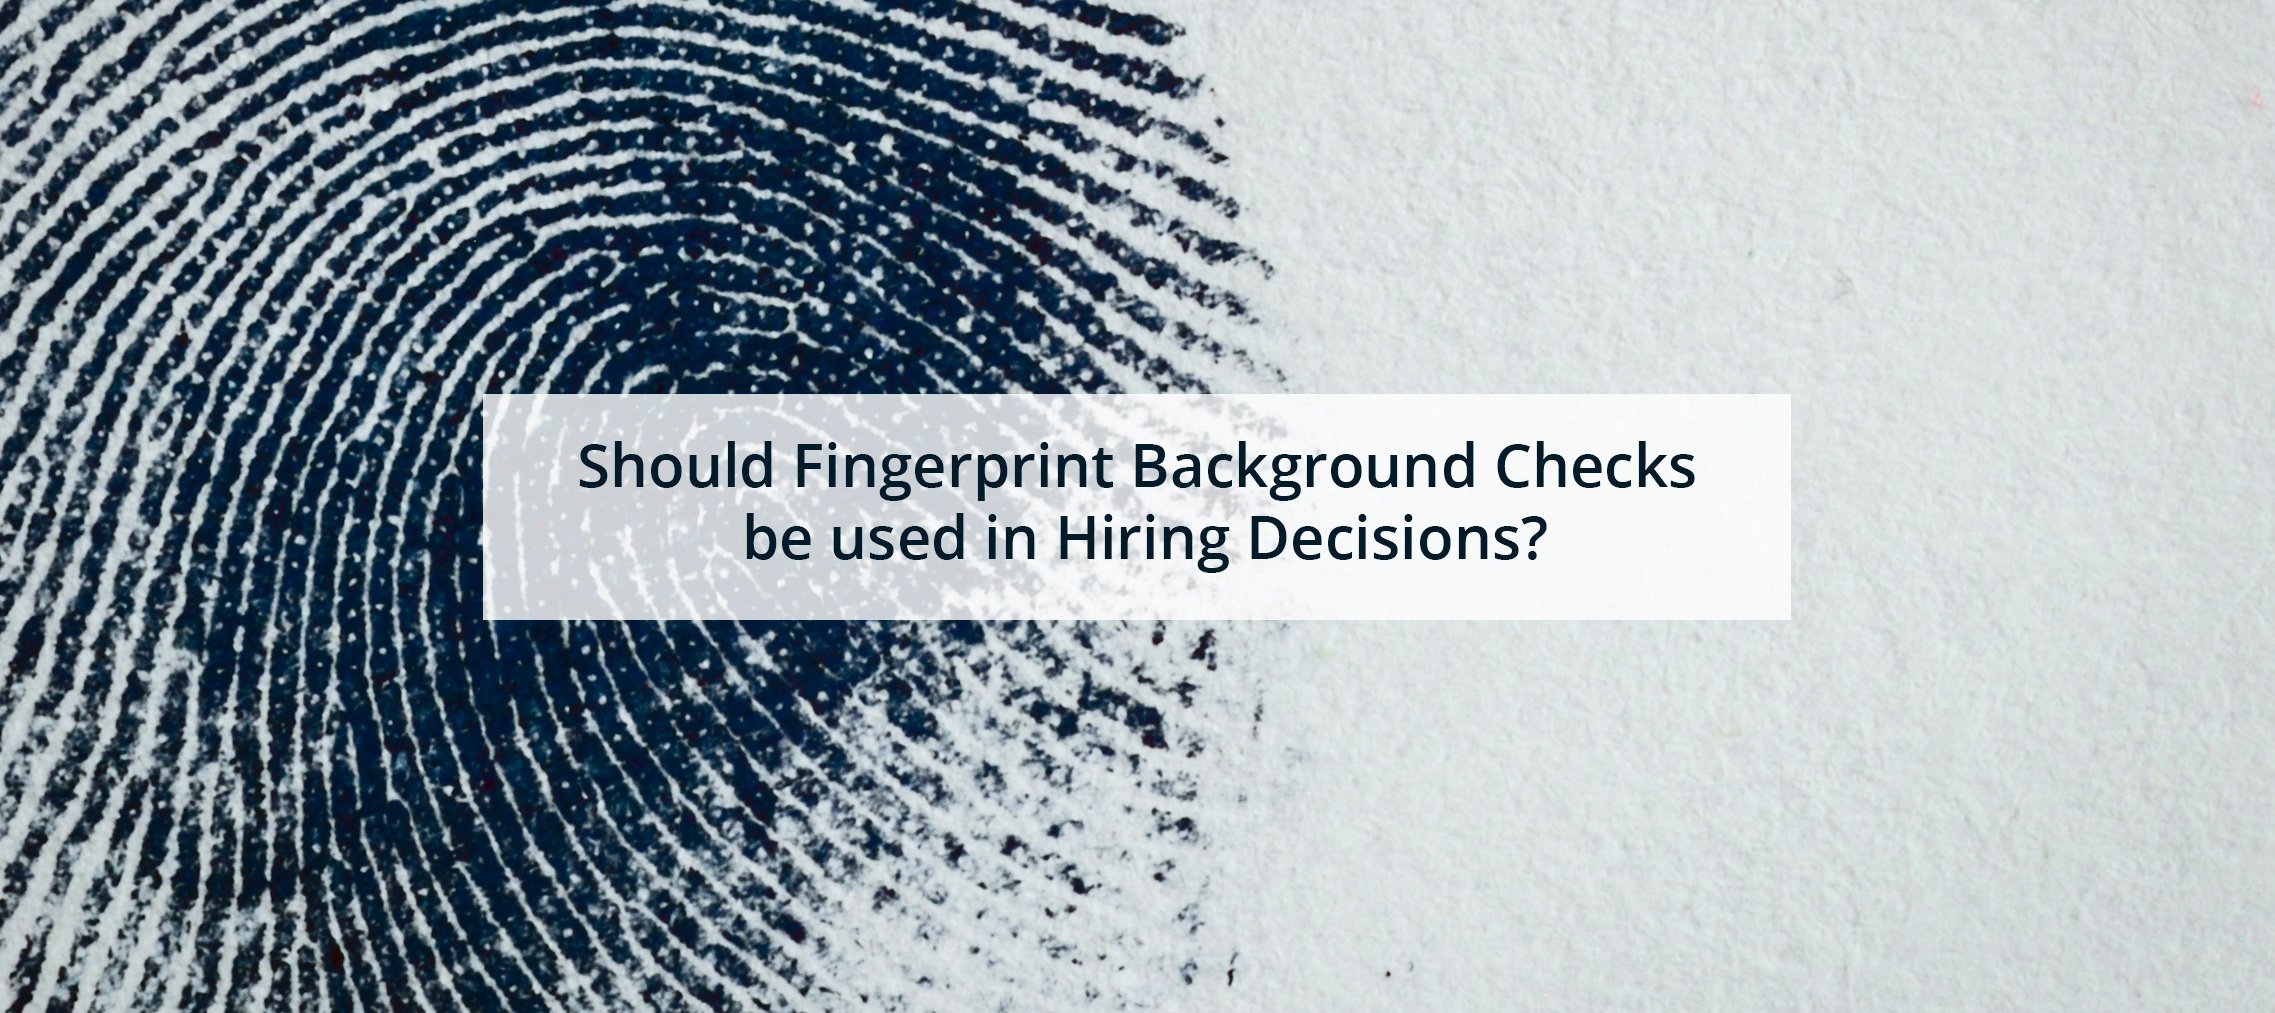 Should Fingerprint Background Checks be used in Hiring Decisions?